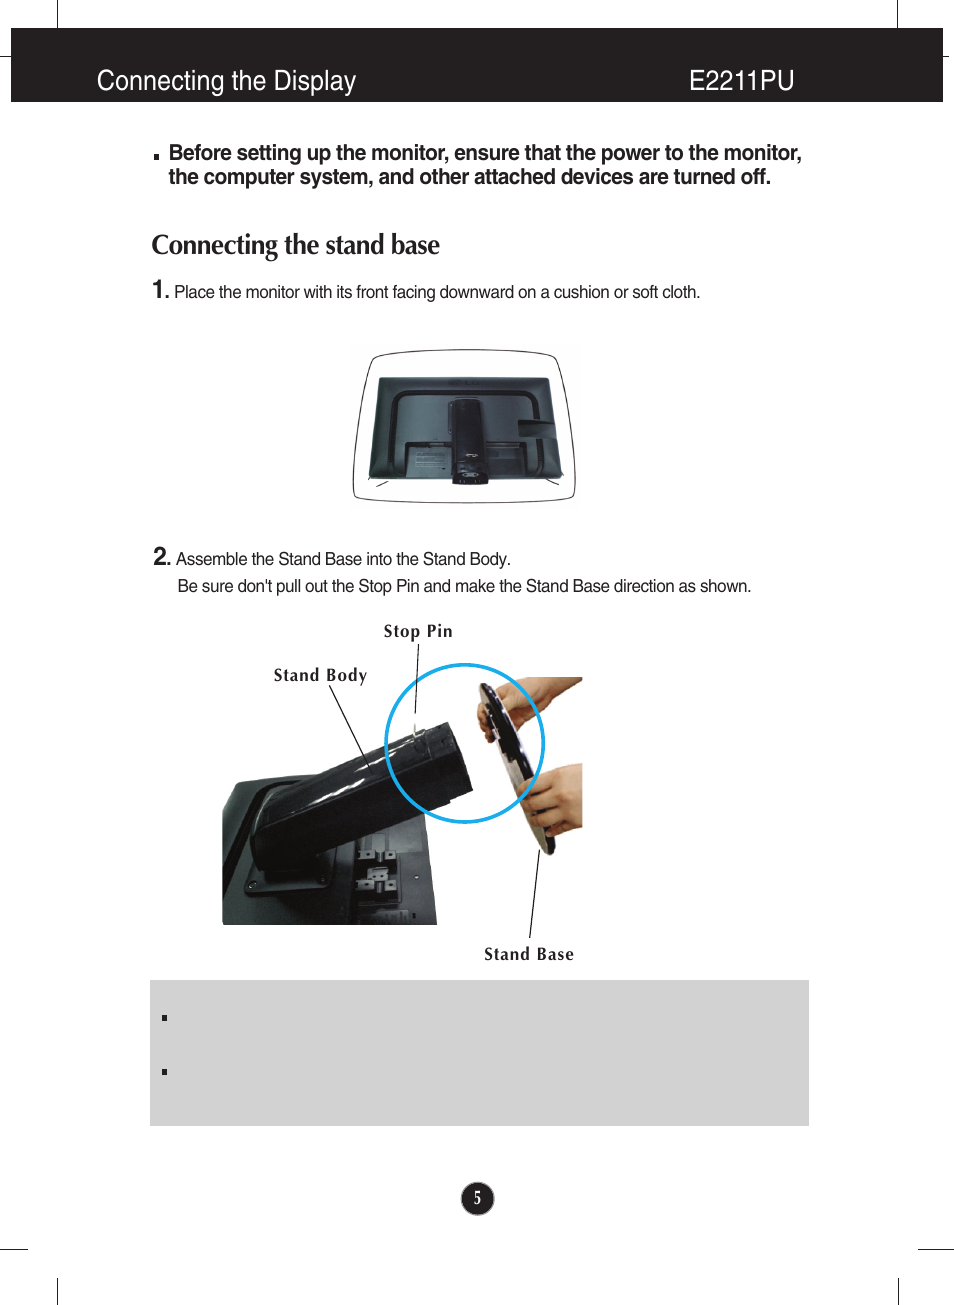 Connecting the display, Connecting the display e2211pu, Connecting the stand base | LG LCD MONITOR E2211PU User Manual | Page 6 / 34